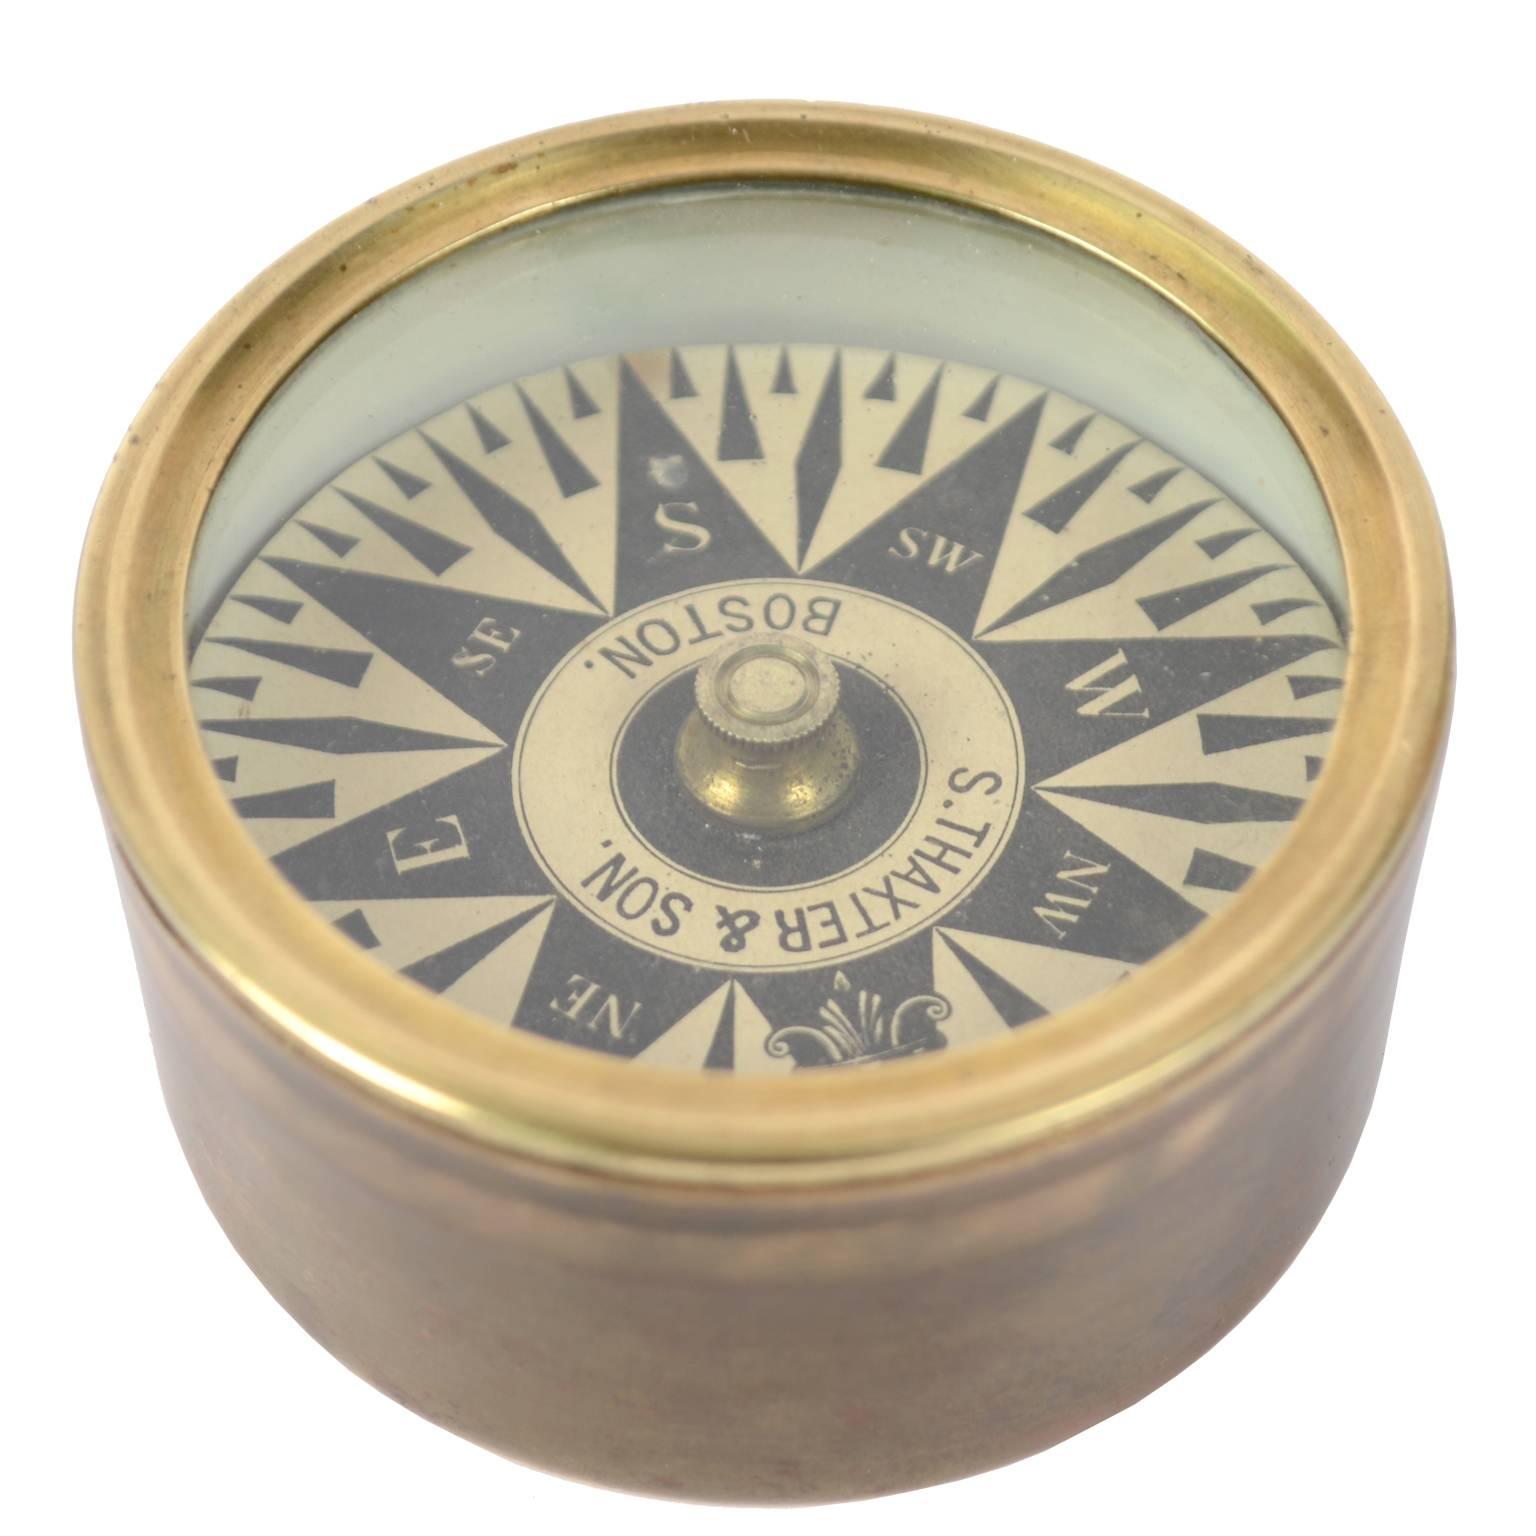 American Compass Placed in Its Original Box of Turned Brass